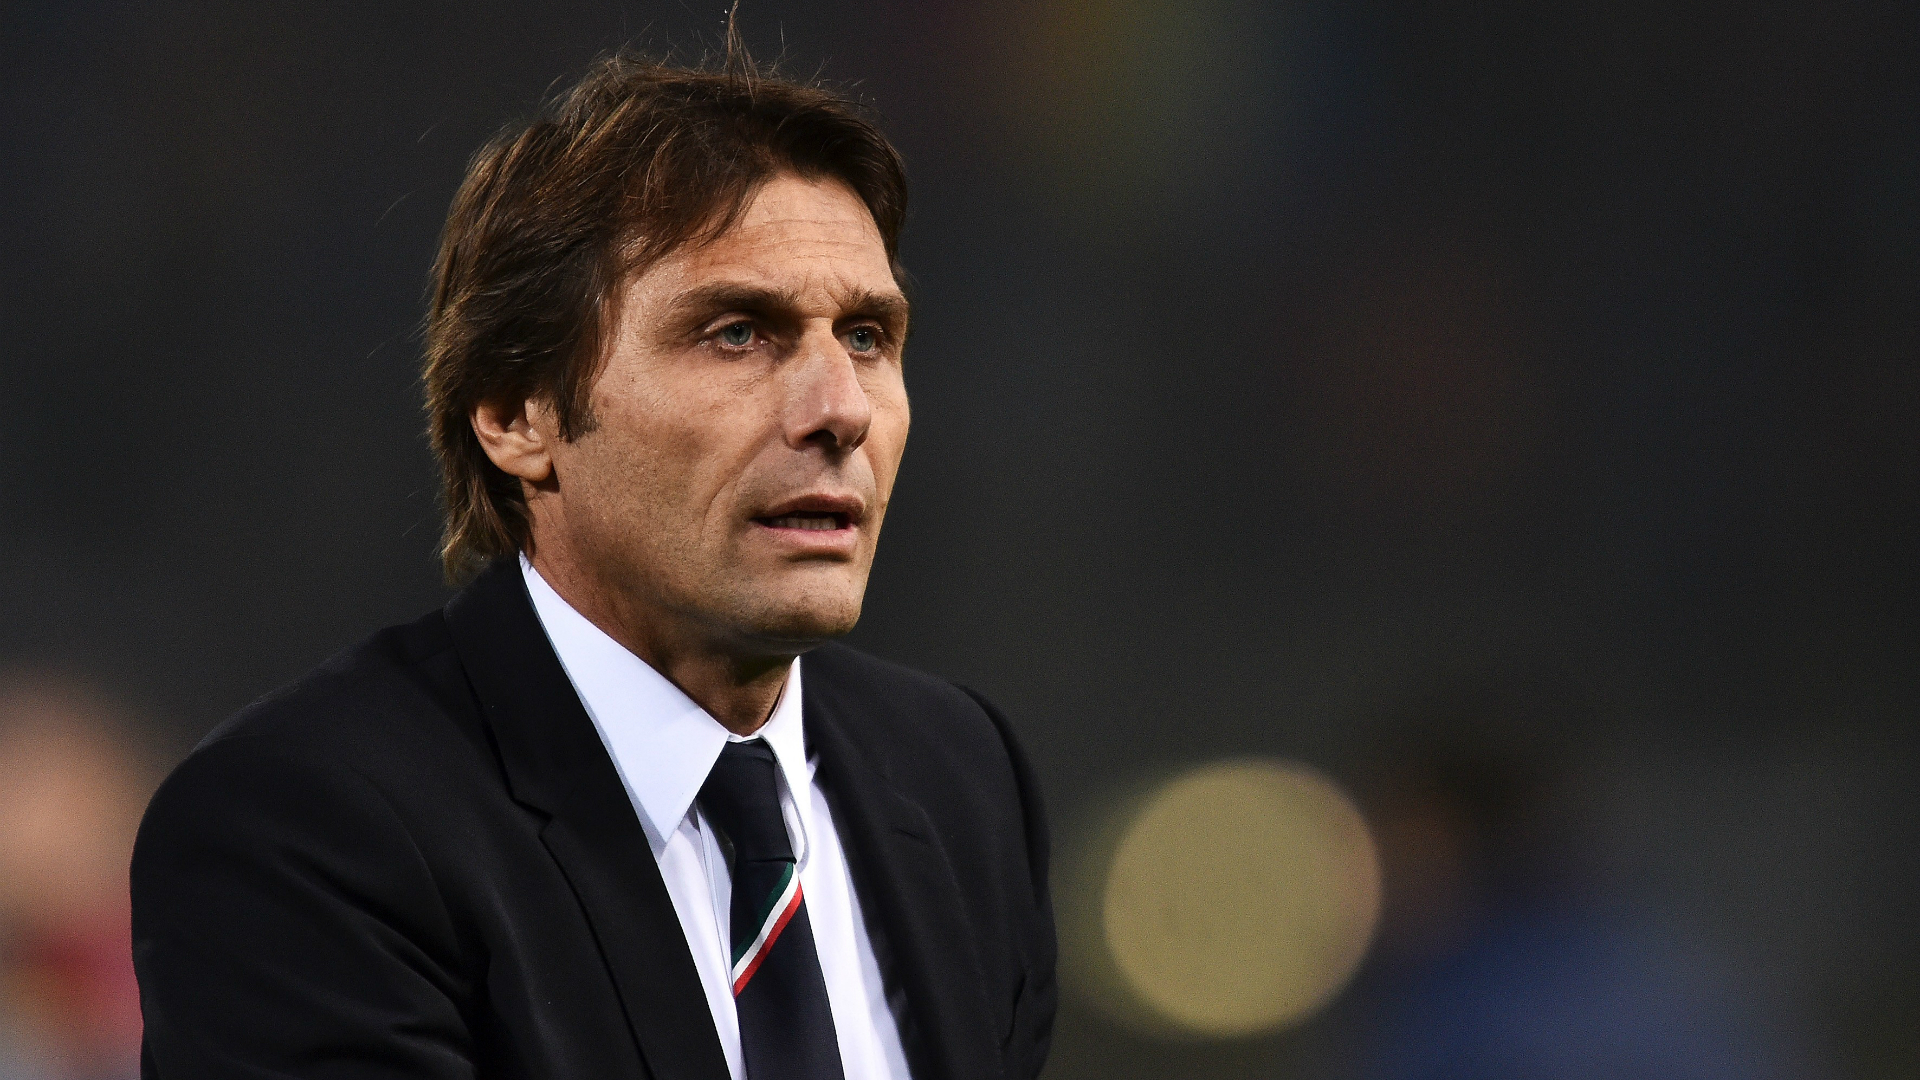 Antonio Conte is currently the Inter Milan manager